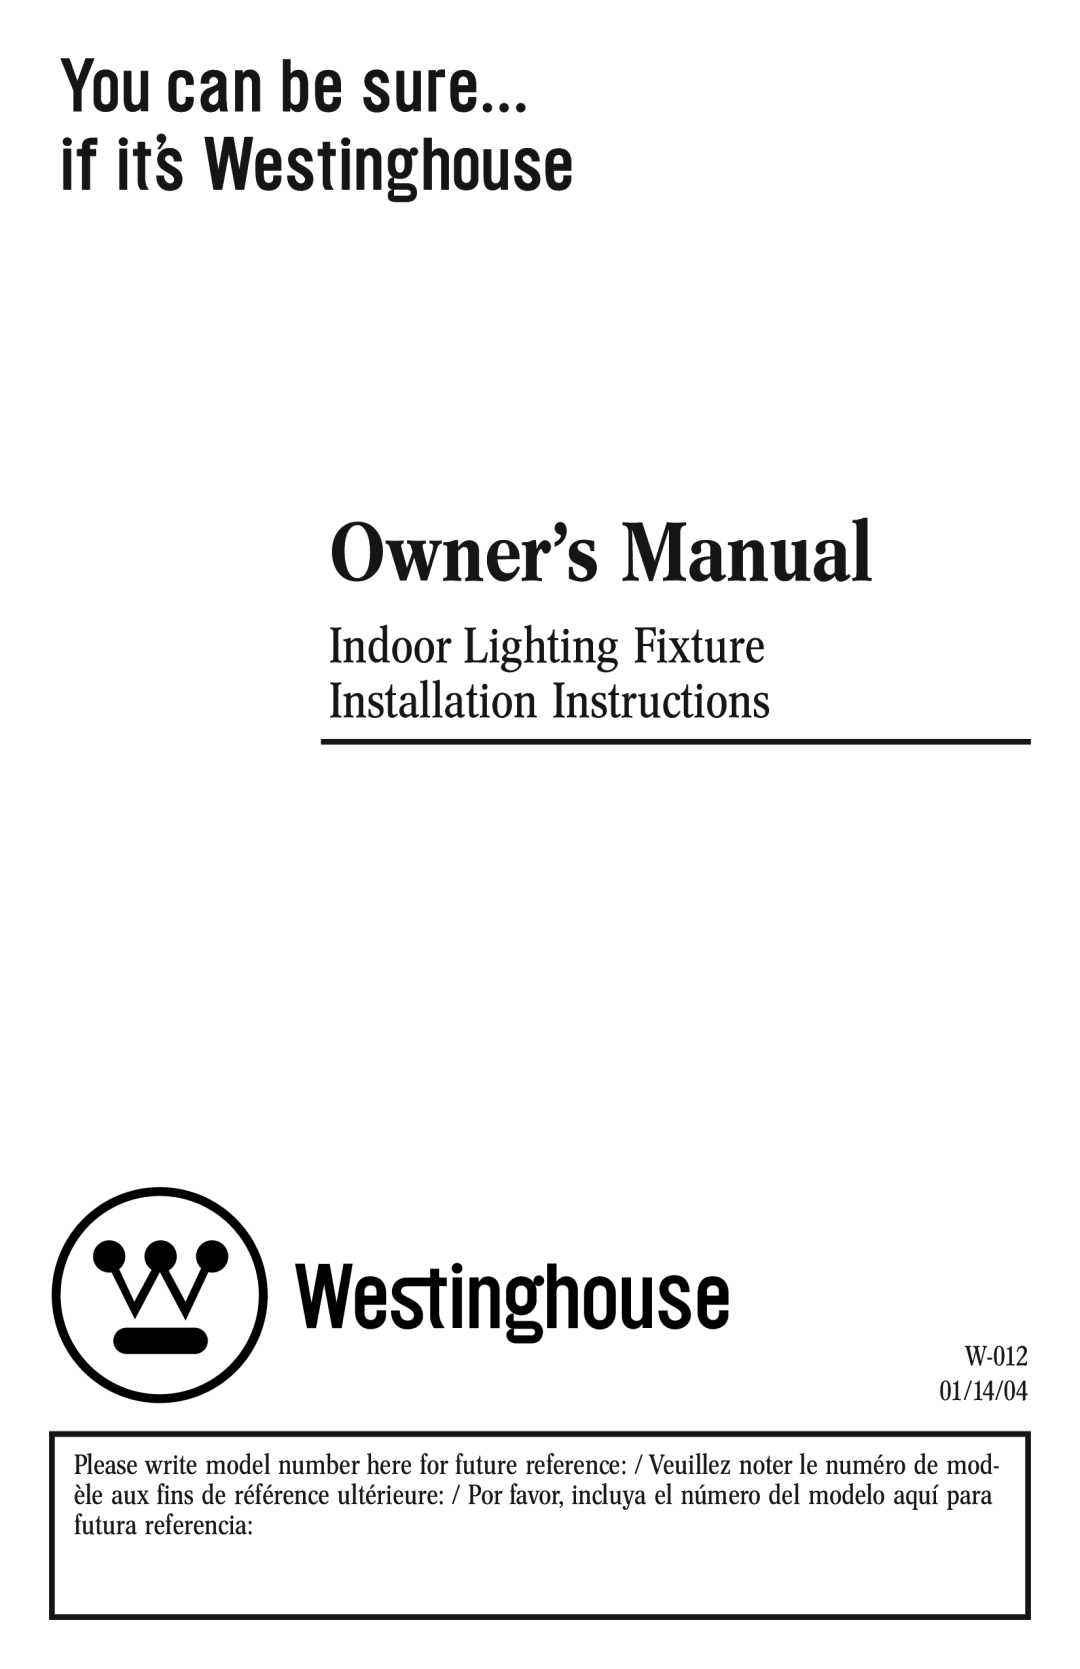 Westinghouse W-012 owner manual Indoor Lighting Fixture Installation Instructions 